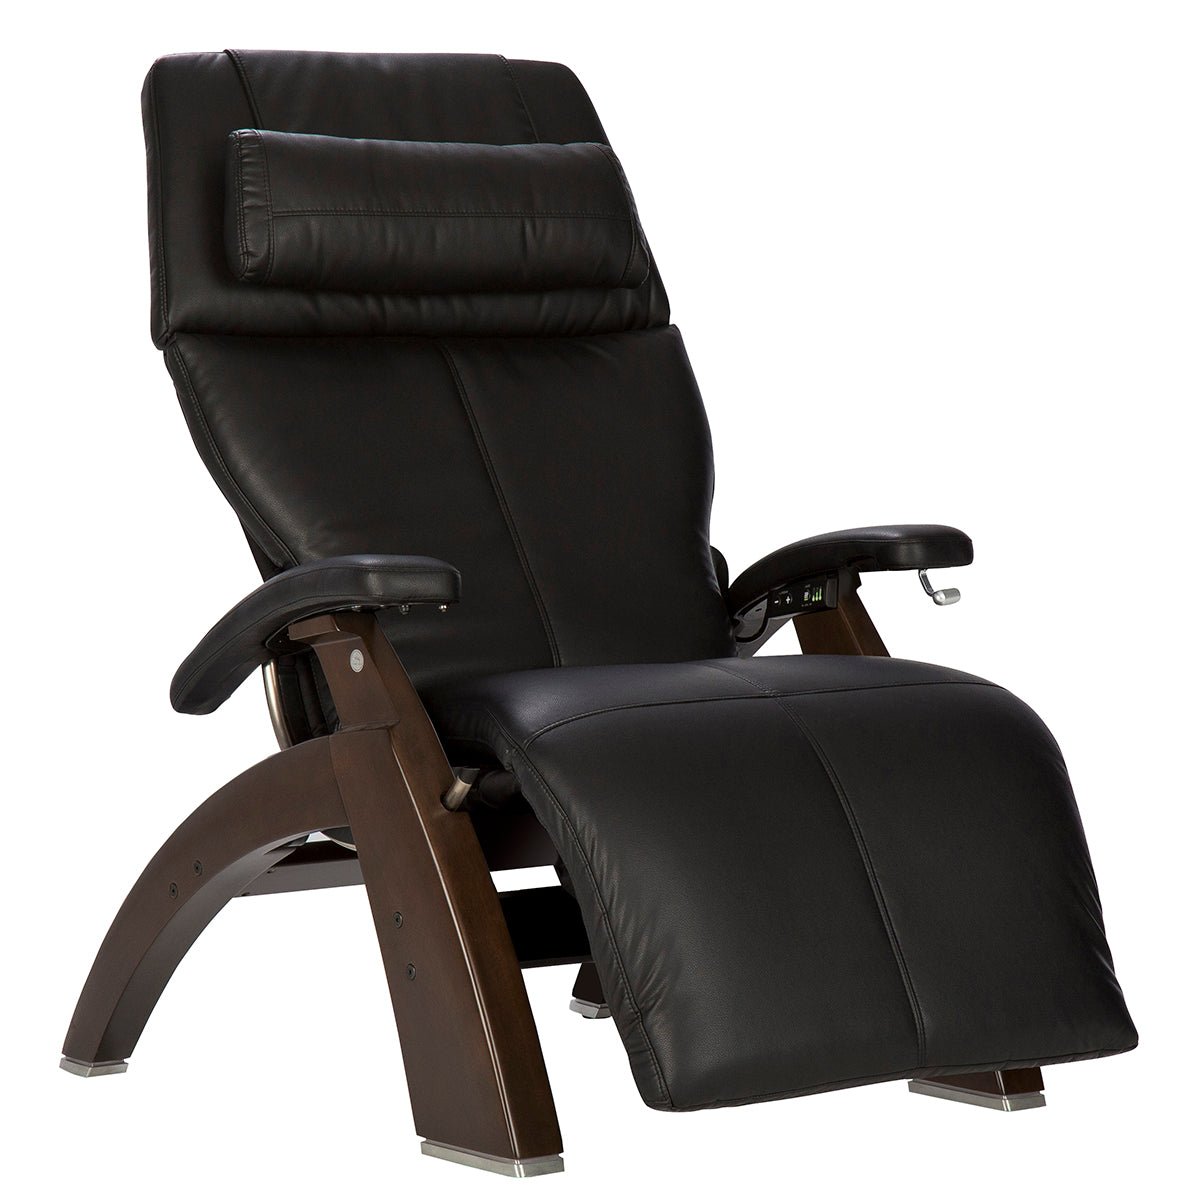 Human TouchArm Chairs, Recliners & Sleeper ChairsHuman Touch Perfect Chair PC-420 Zero Gravity ReclinerBlack Premium LeatherMassage Chair Heaven